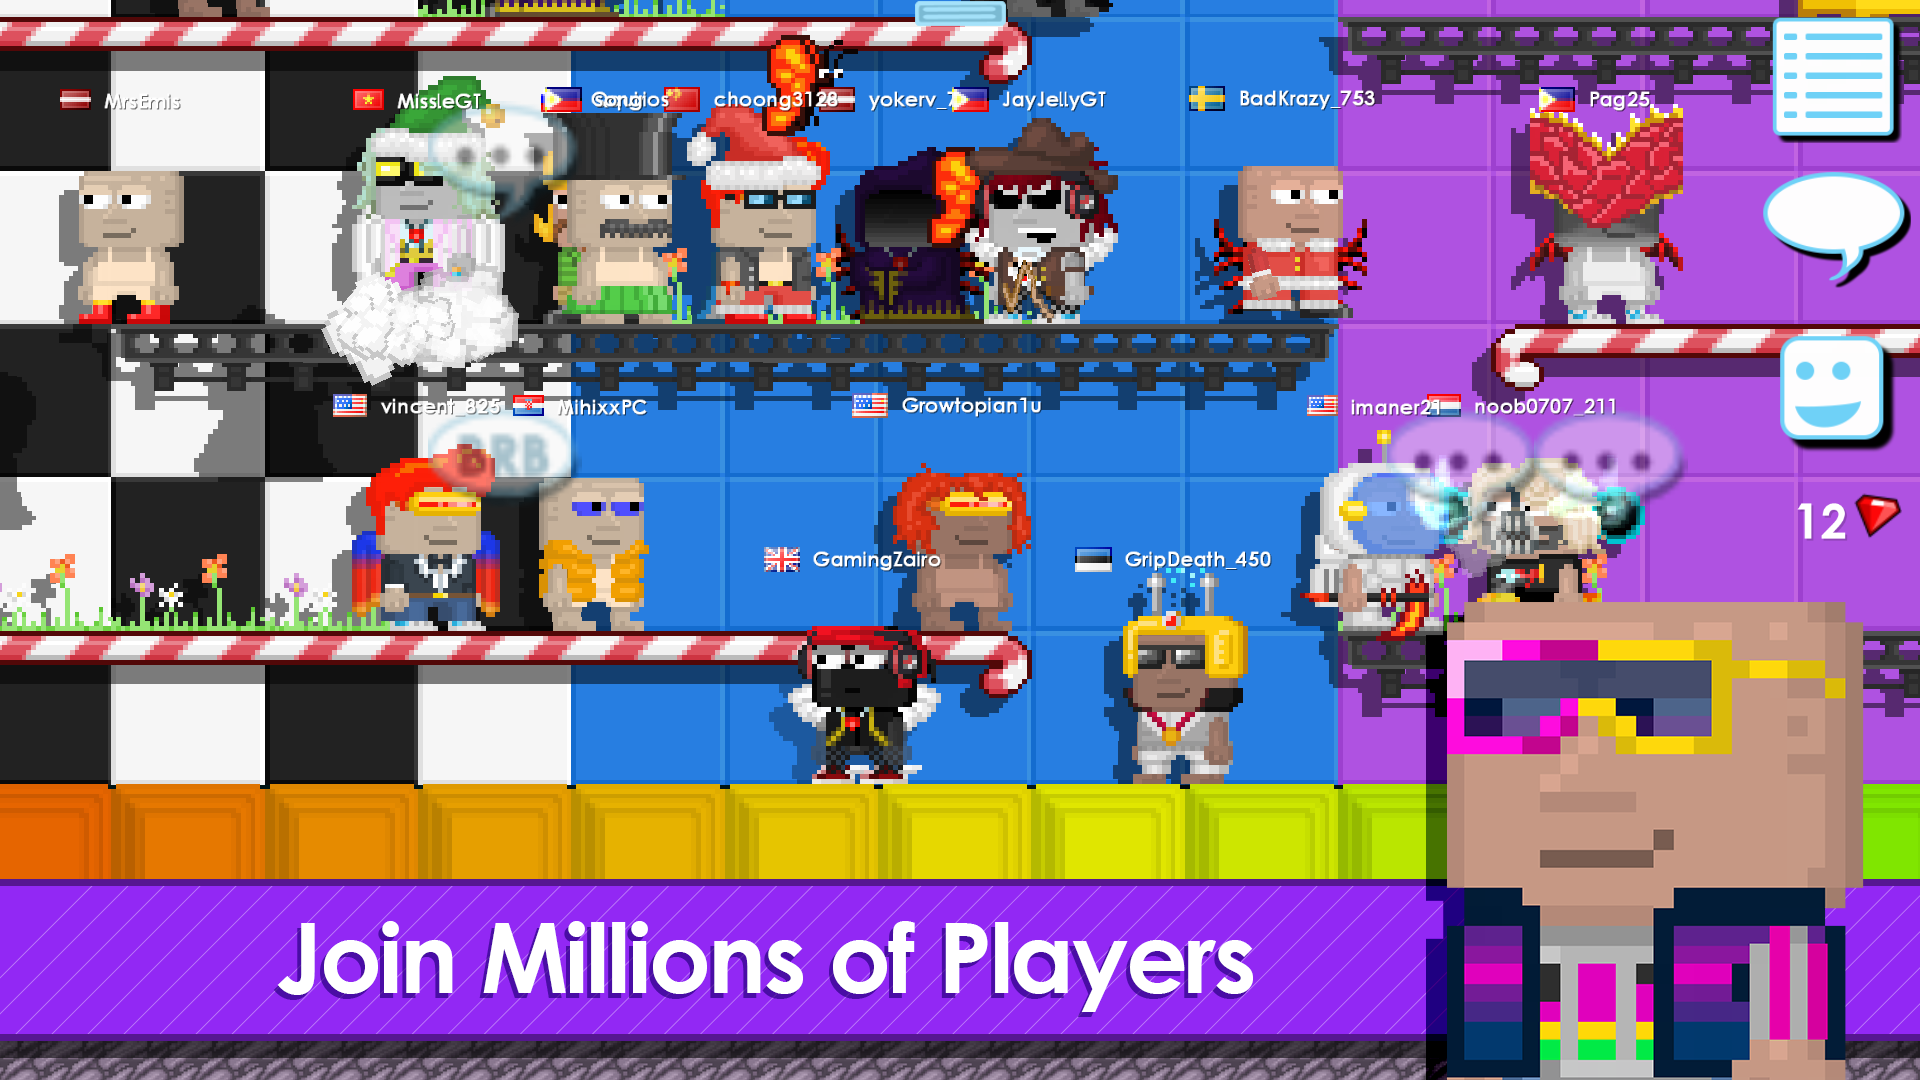 Growtopia for Android - APK Download - 